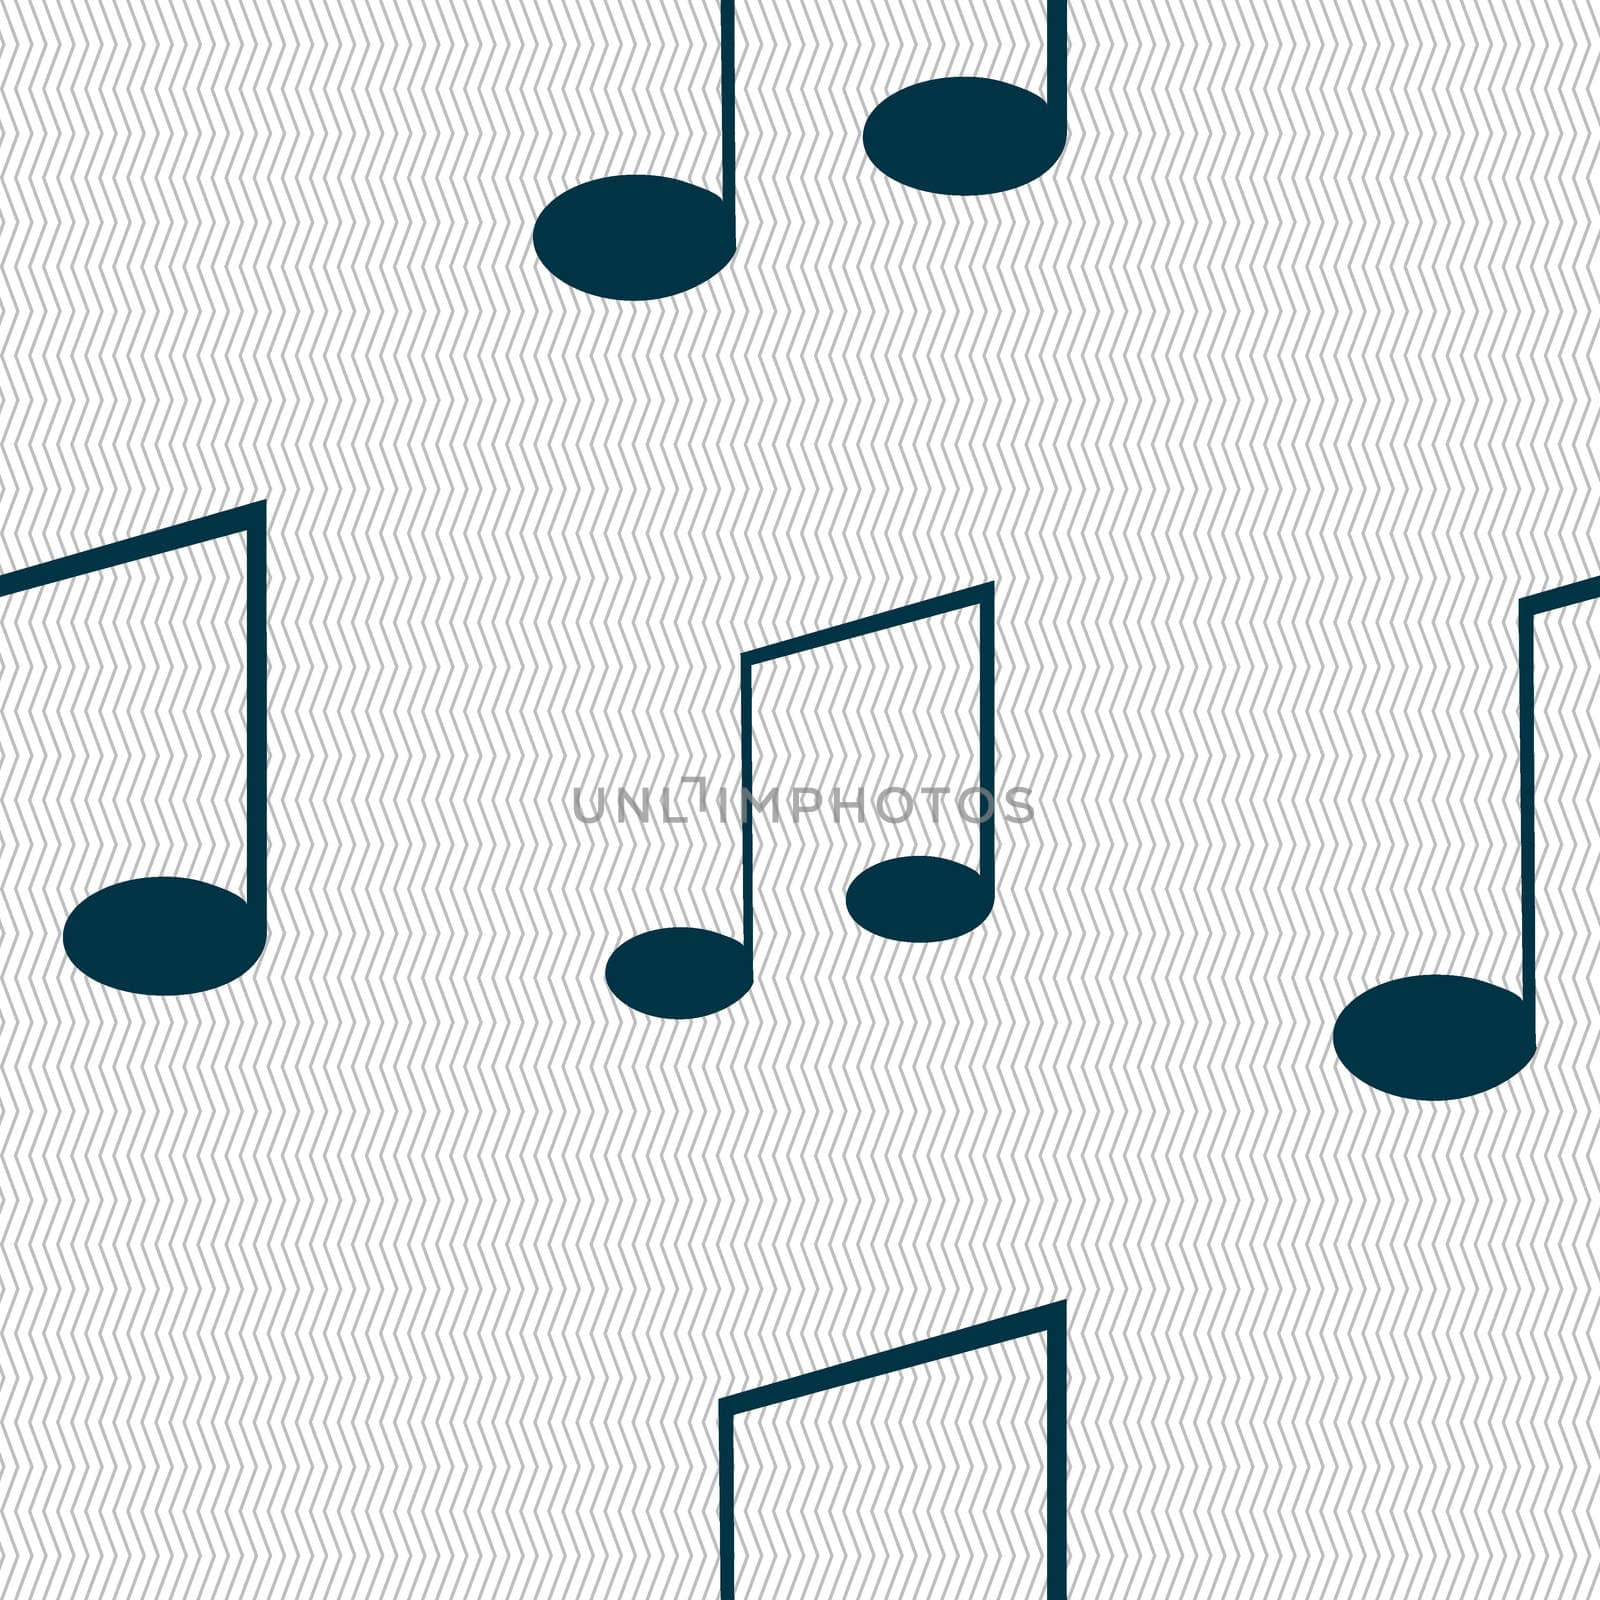 Music note sign icon. Musical symbol. Seamless abstract background with geometric shapes. illustration